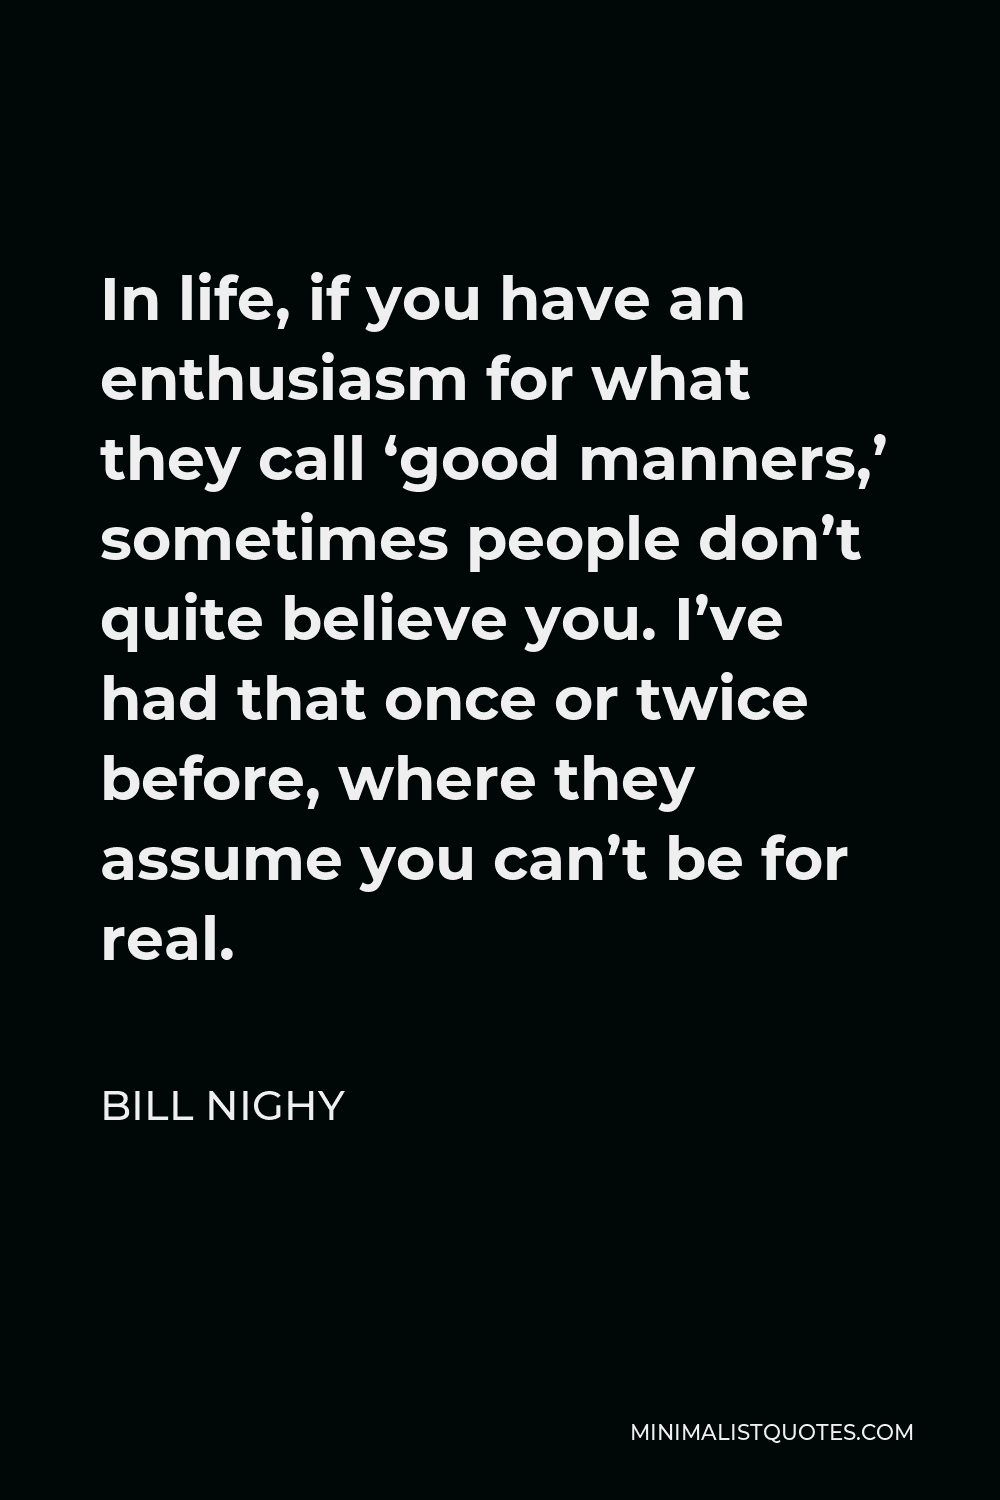 Bill Nighy Quote - In life, if you have an enthusiasm for what they call ‘good manners,’ sometimes people don’t quite believe you. I’ve had that once or twice before, where they assume you can’t be for real.